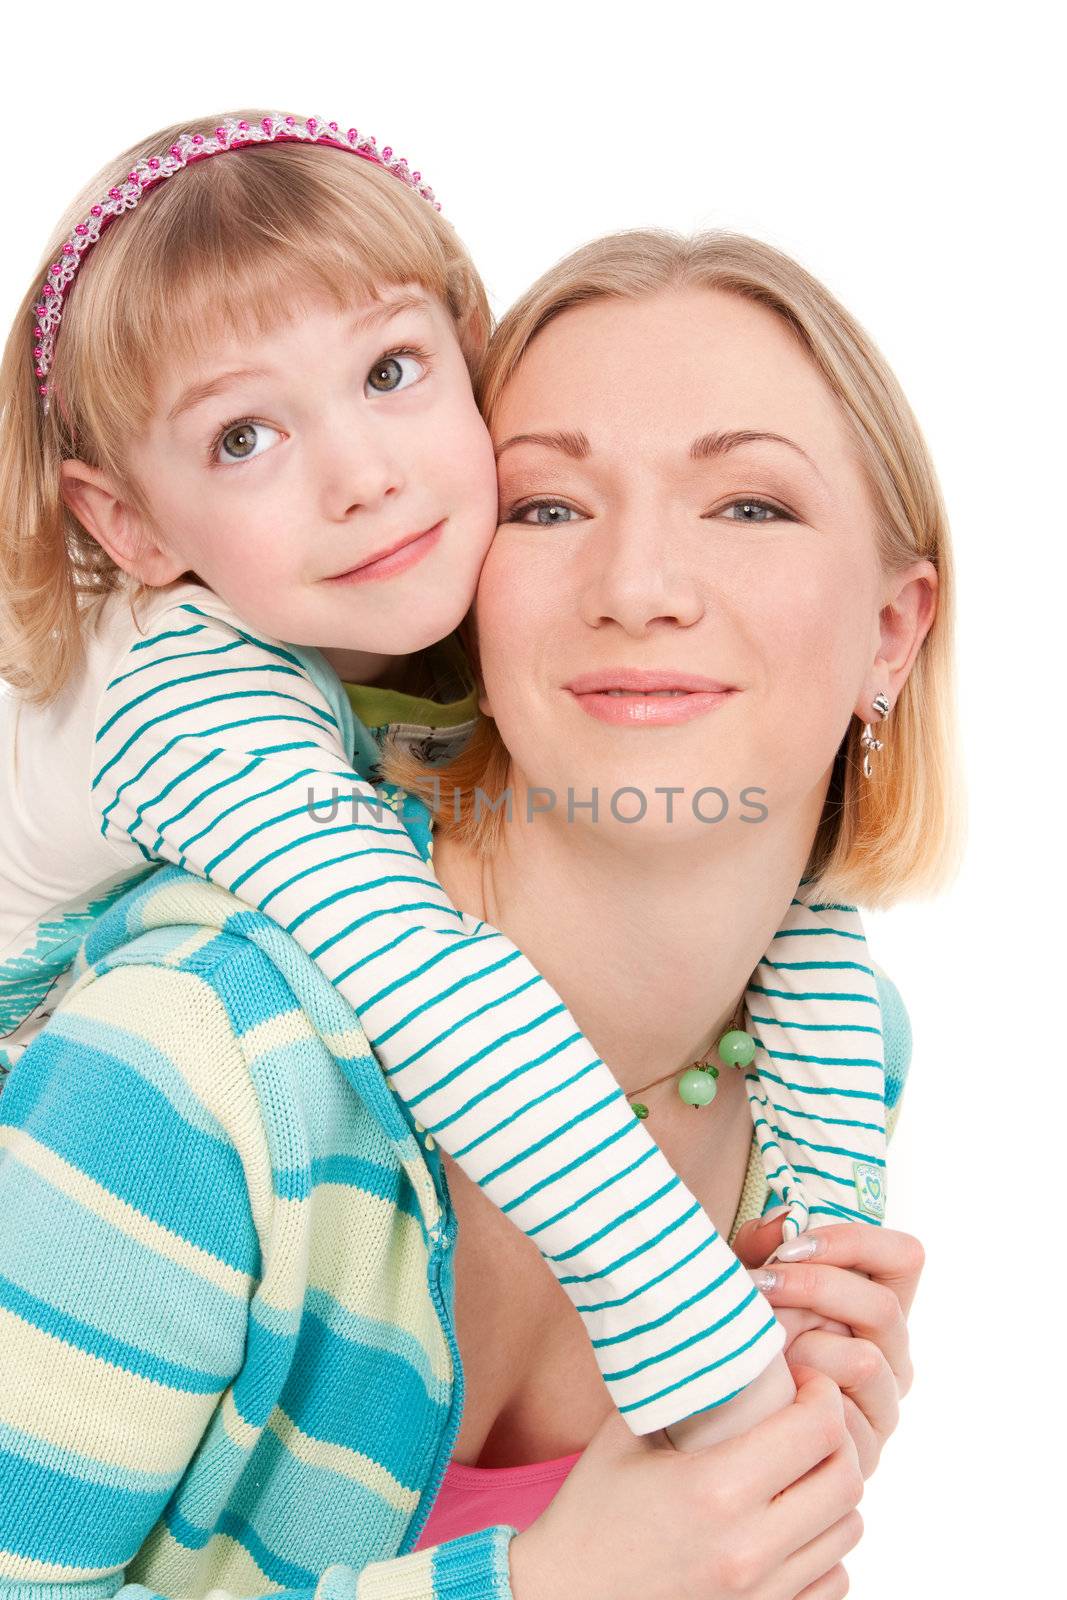 Mother and daughter by mihhailov